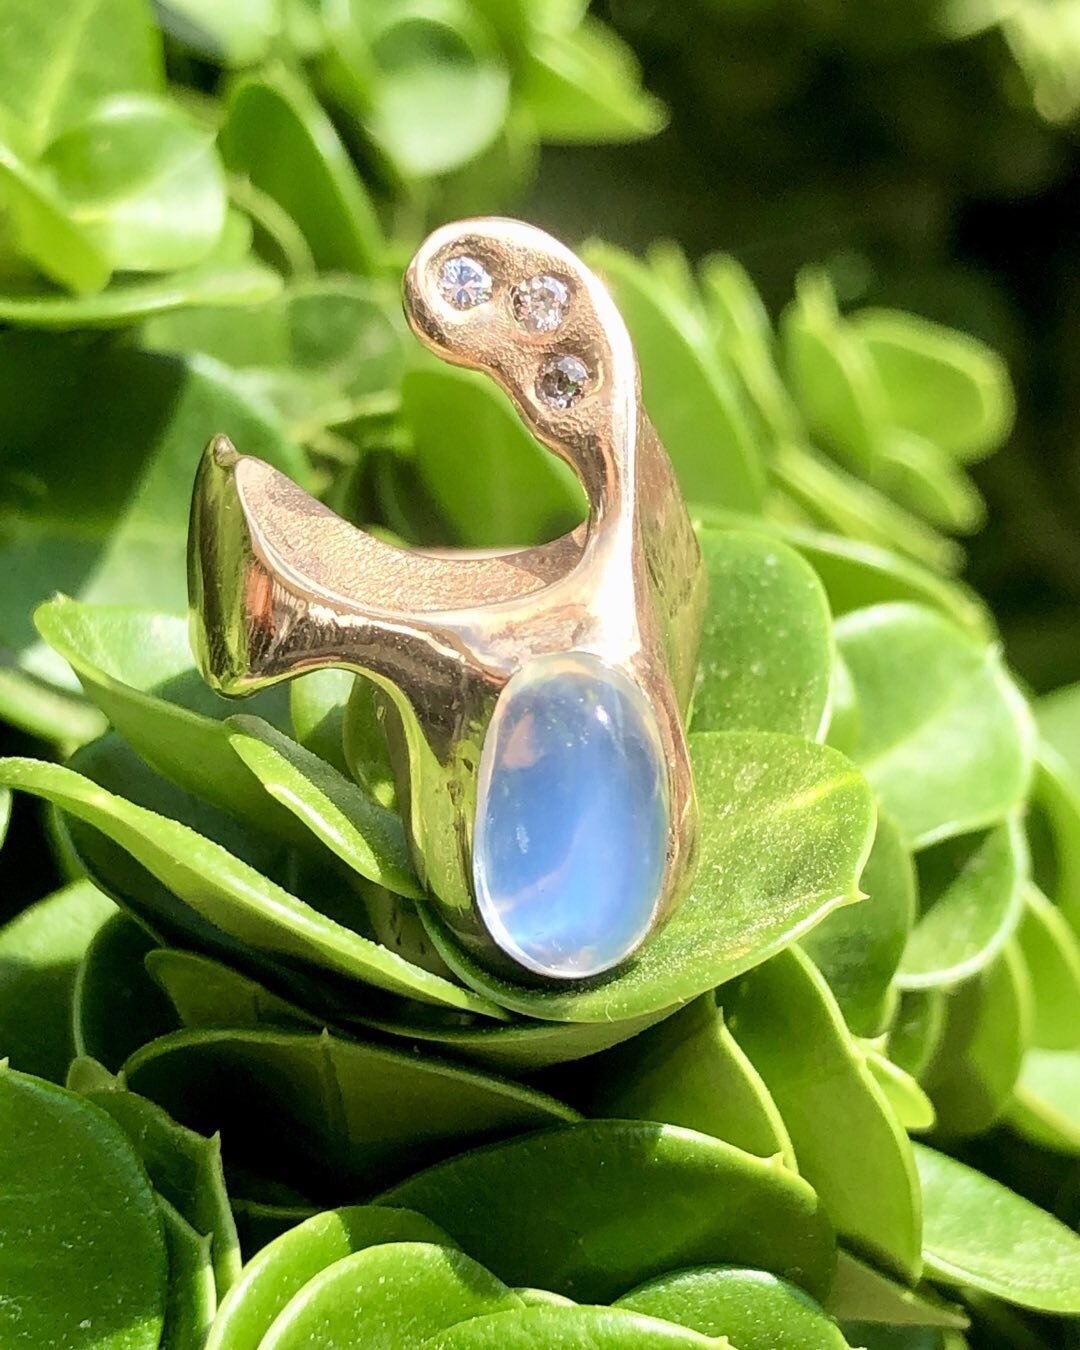 ✨Just in!✨ Magical moonstone! 

**Moonstone has long been known to be a symbol of light, hope and new beginnings**

Stop in or shop our website at Toddandcompany.com
.
.
.
#moonstone #14k #14gold #gold #jewelry #moonstonering #ring #diamond #estateje